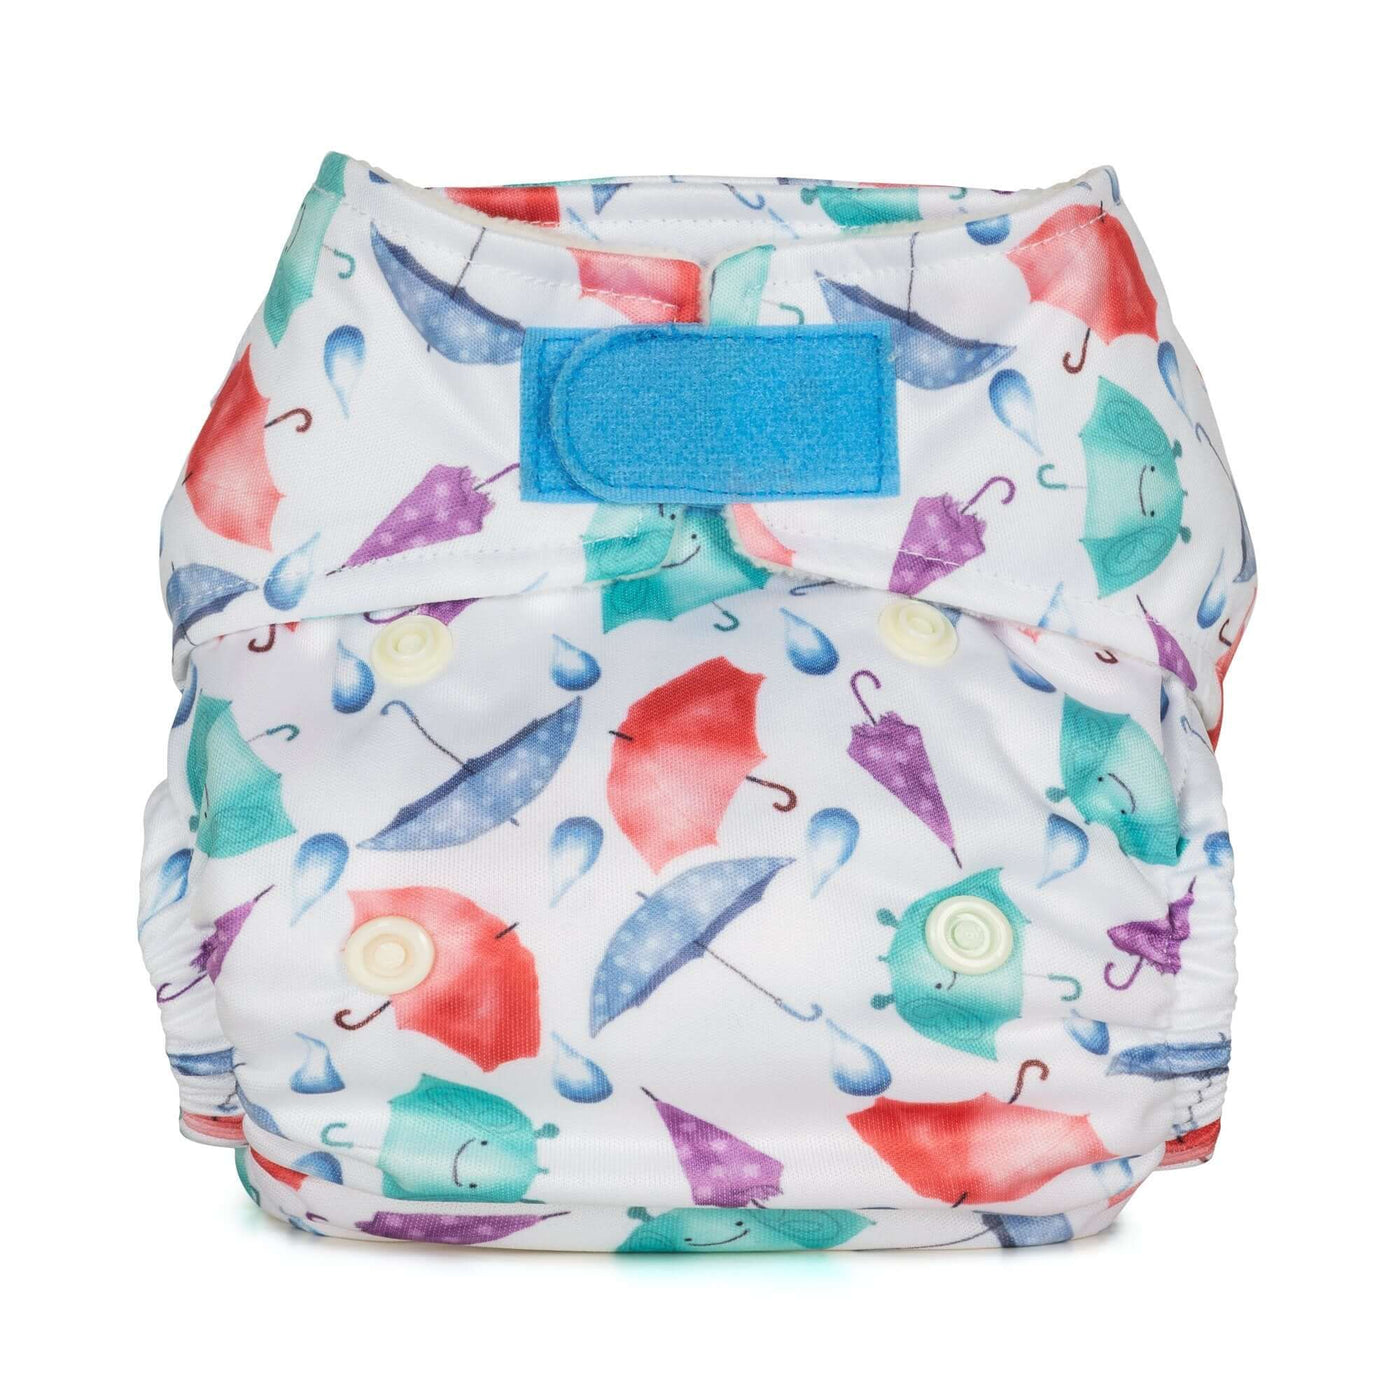 Baba + Boo Newborn Reusable Nappy - Prints Colour: Umbrellas reusable nappies all in one nappies Earthlets